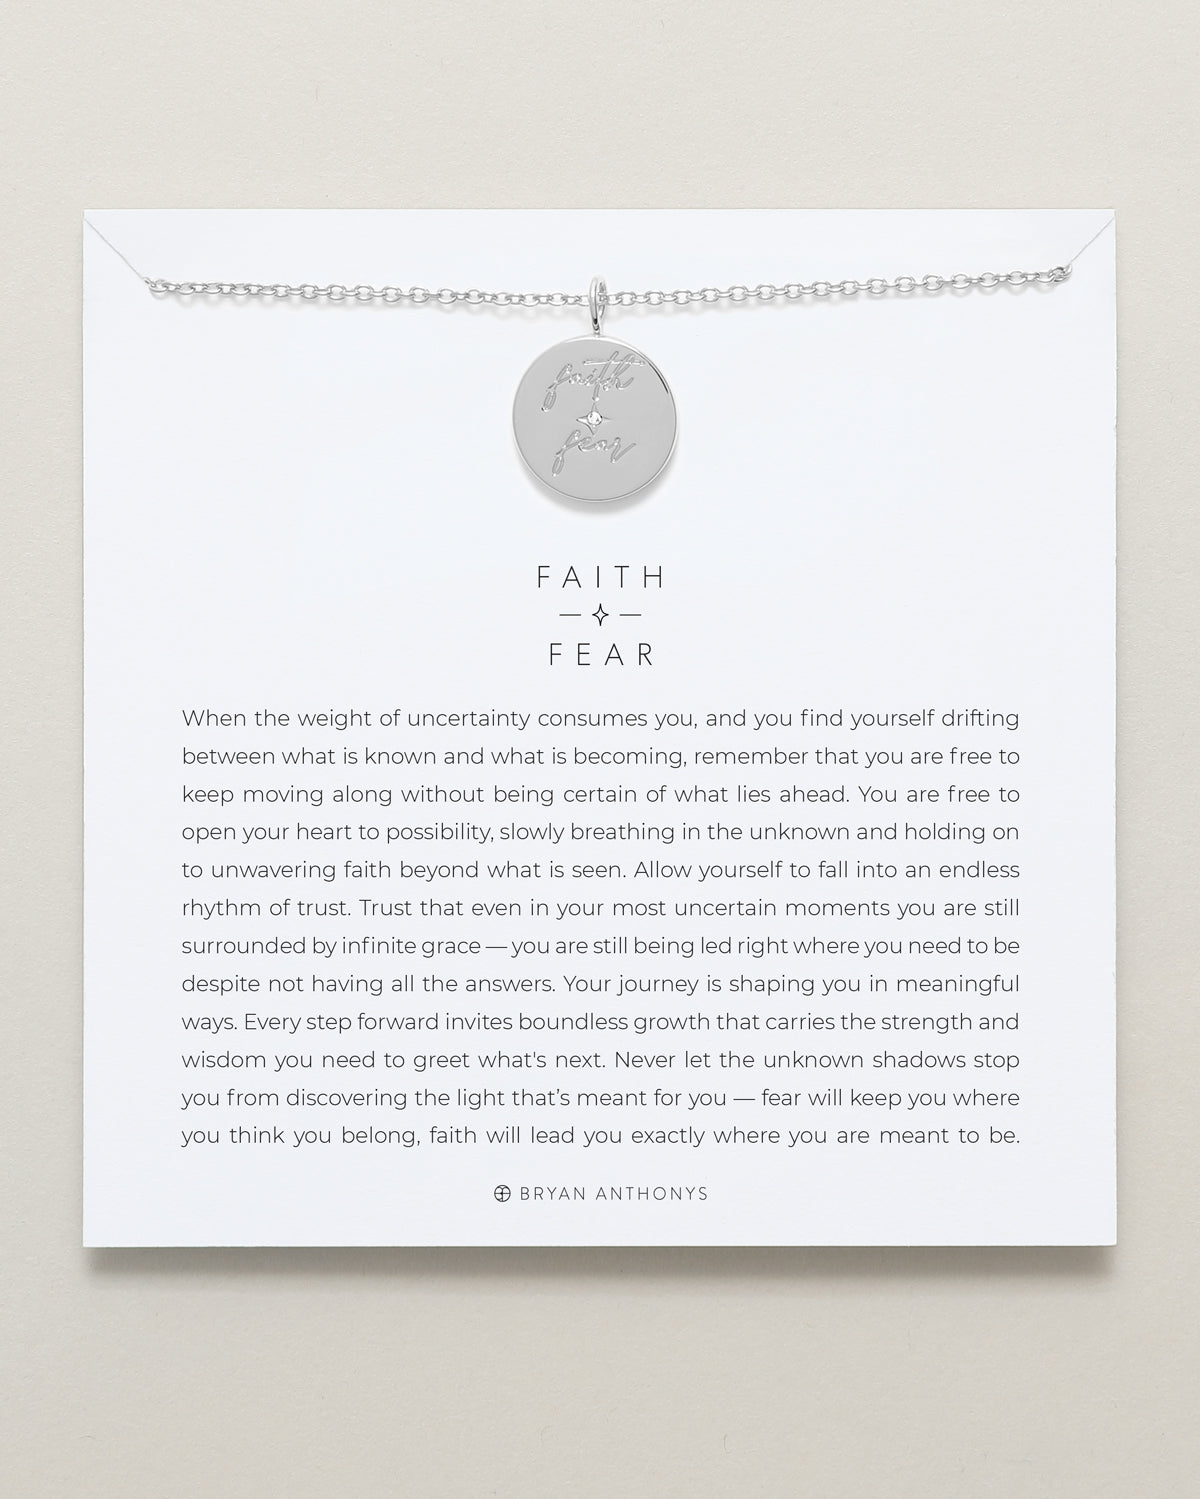 bryan anthonys faith over fear necklace mindful messages silver